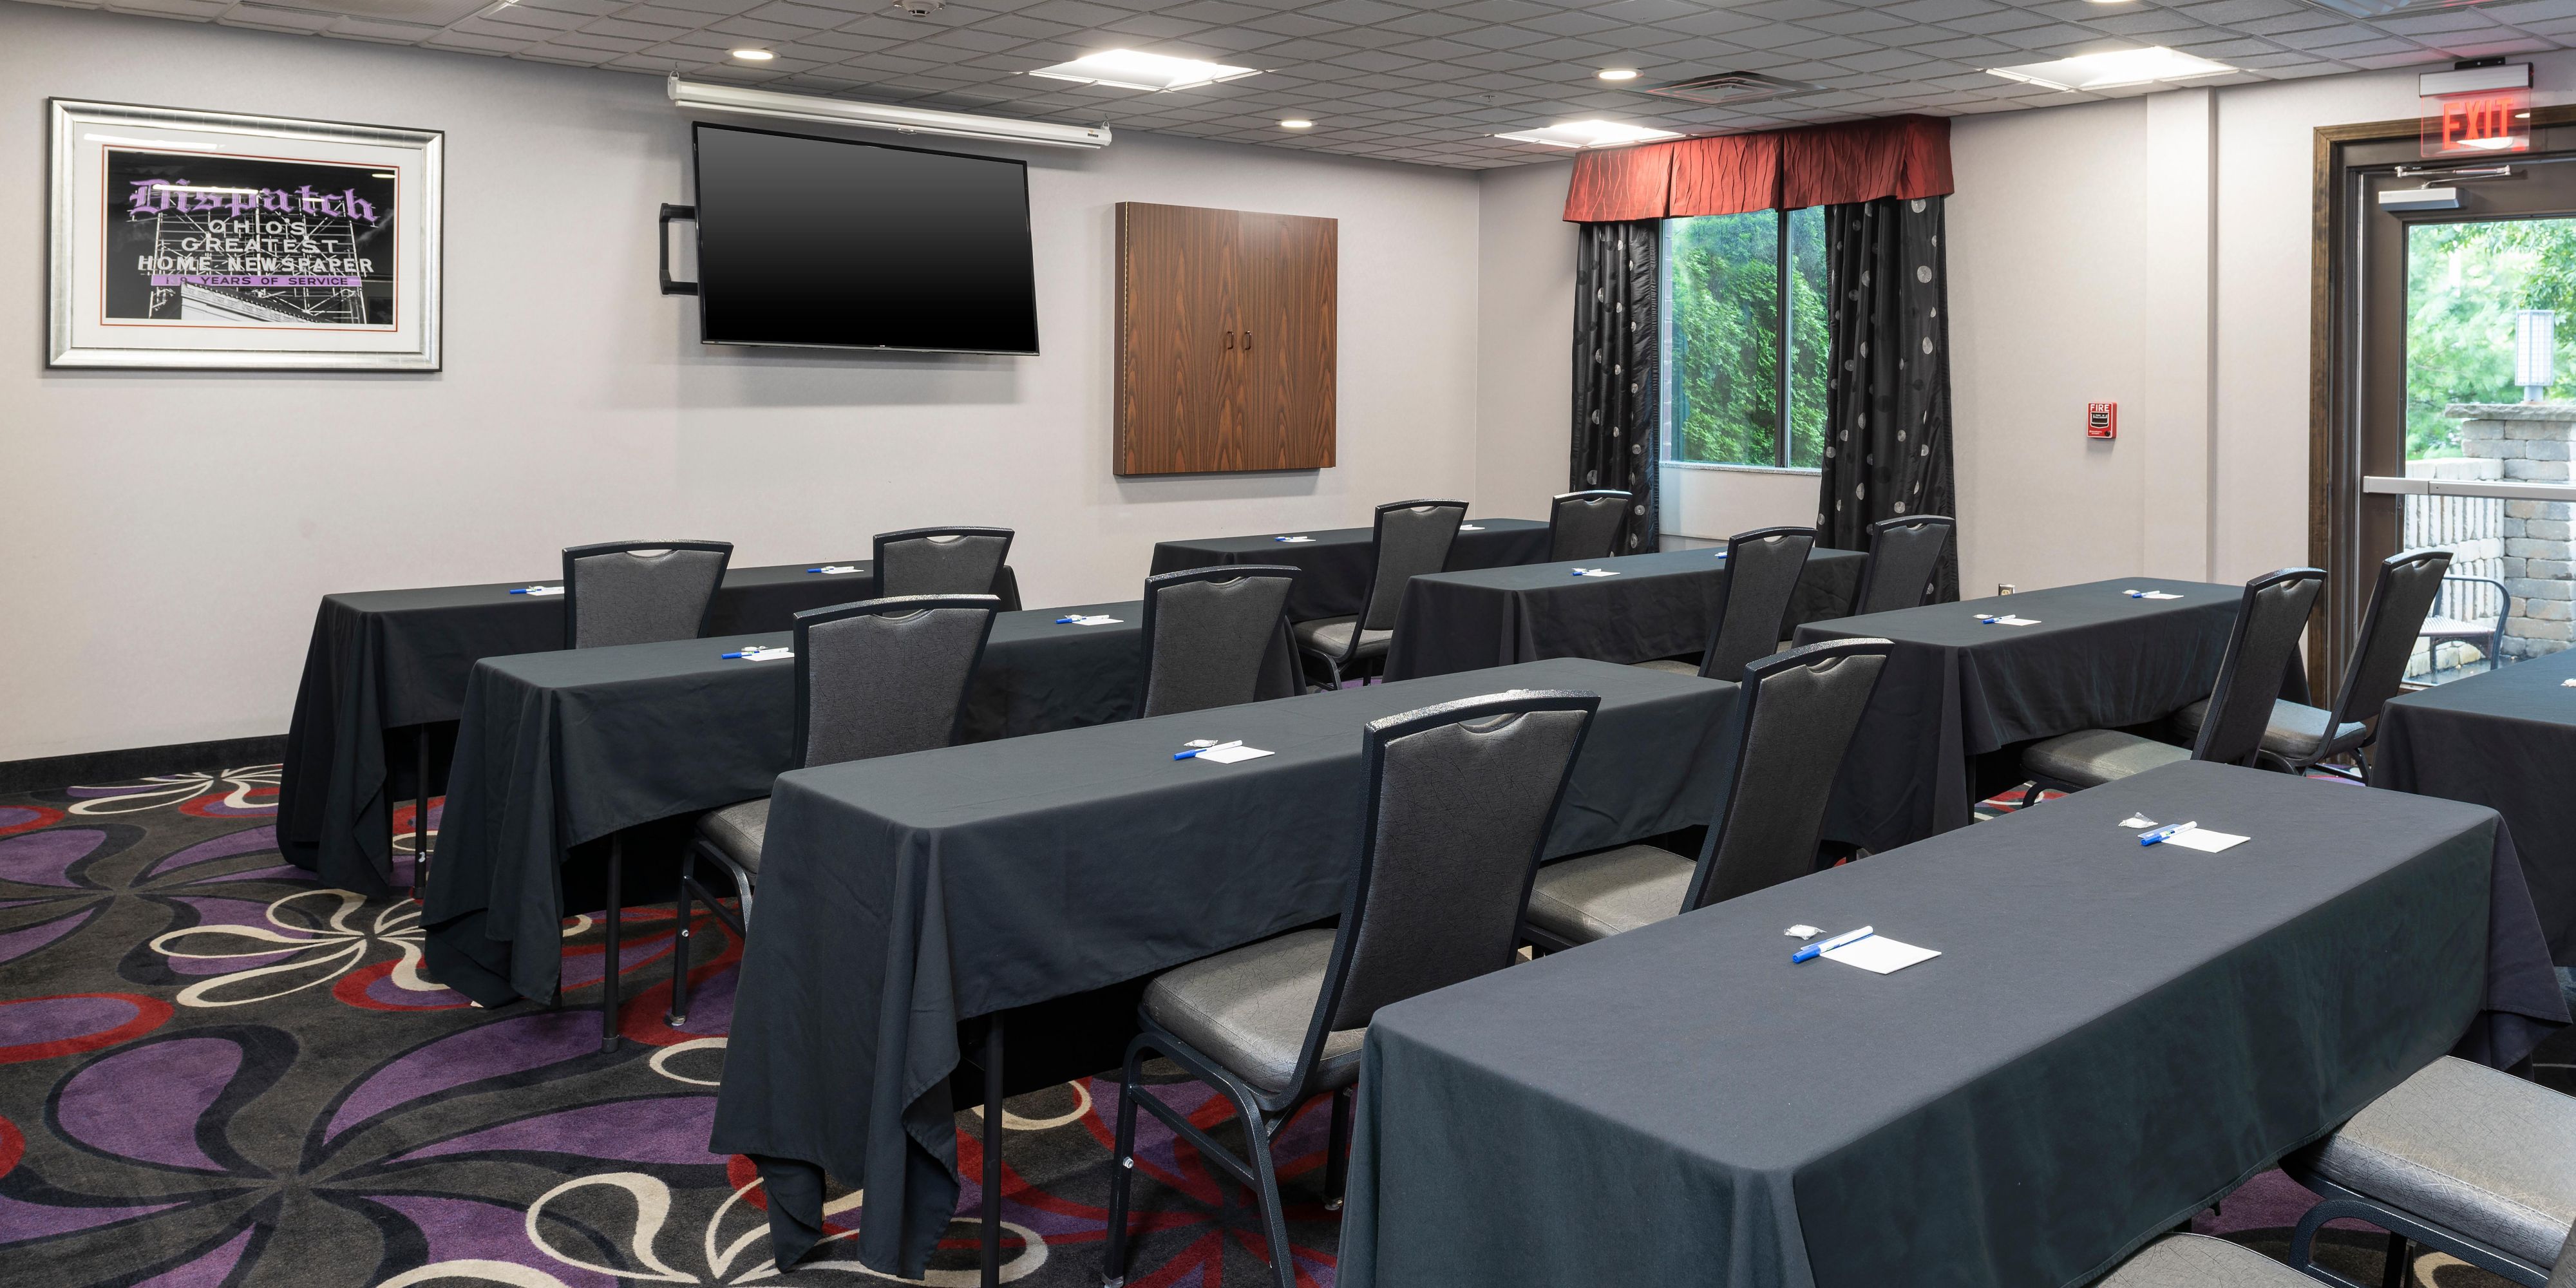 Book our beautiful meeting room for groups up to 20 guests depending on the set of the room. All meetings come with complimentary items such as pads, pens, mints and bottled water. On site Sales Manager will be able to assist with all the details of your meeting ranging to AV equipment, setting up snacks or plans for meals.